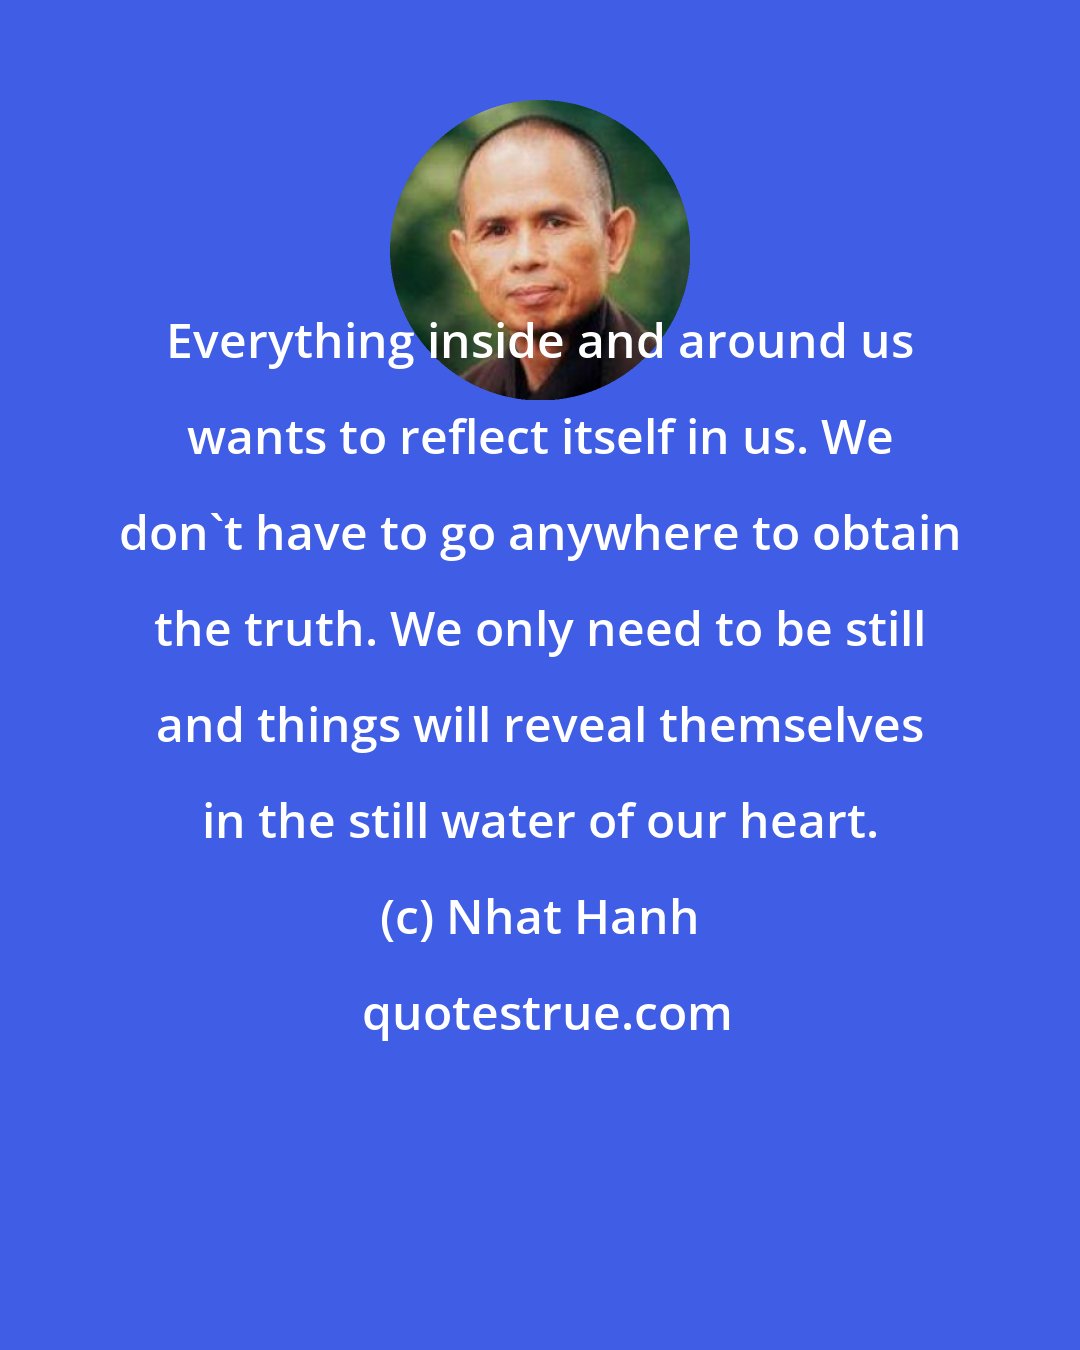 Nhat Hanh: Everything inside and around us wants to reflect itself in us. We don't have to go anywhere to obtain the truth. We only need to be still and things will reveal themselves in the still water of our heart.